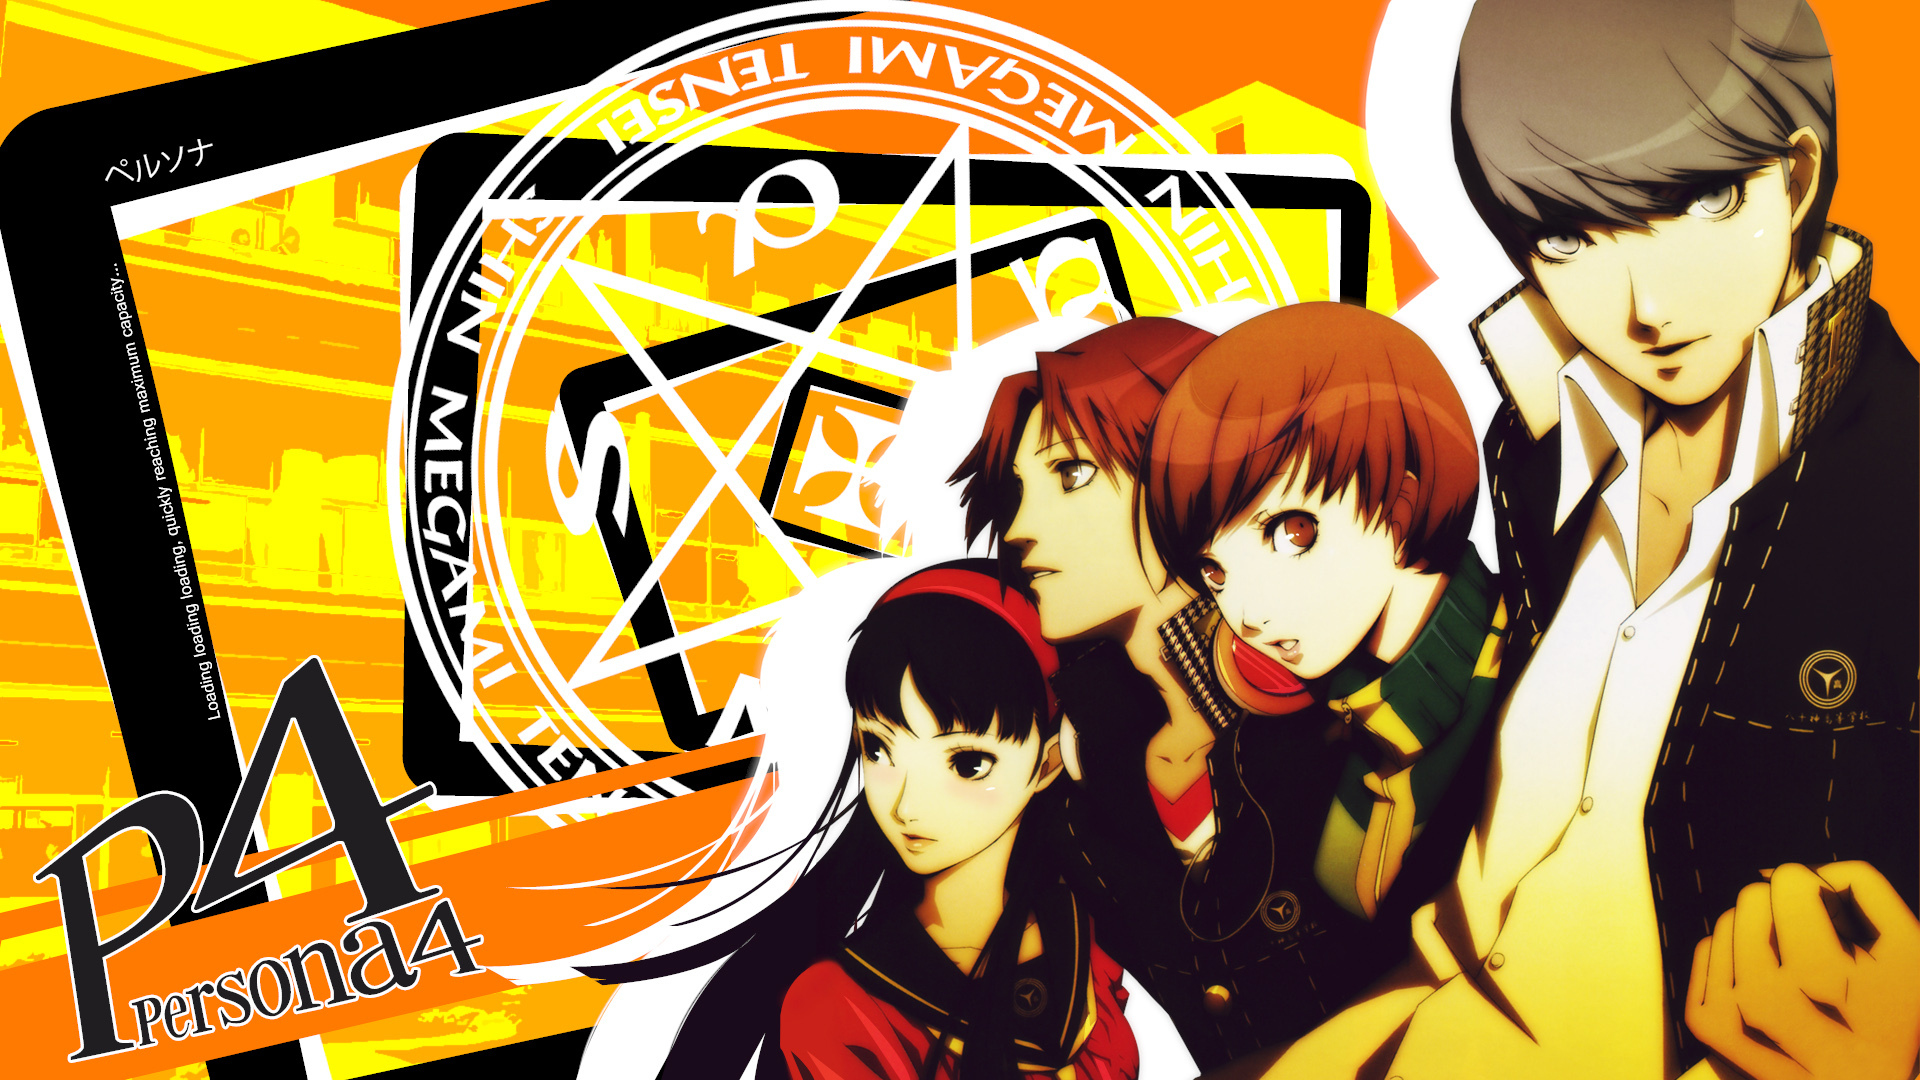 105 Persona 4 HD Wallpapers | Backgrounds - Wallpaper Abyss - Page 3